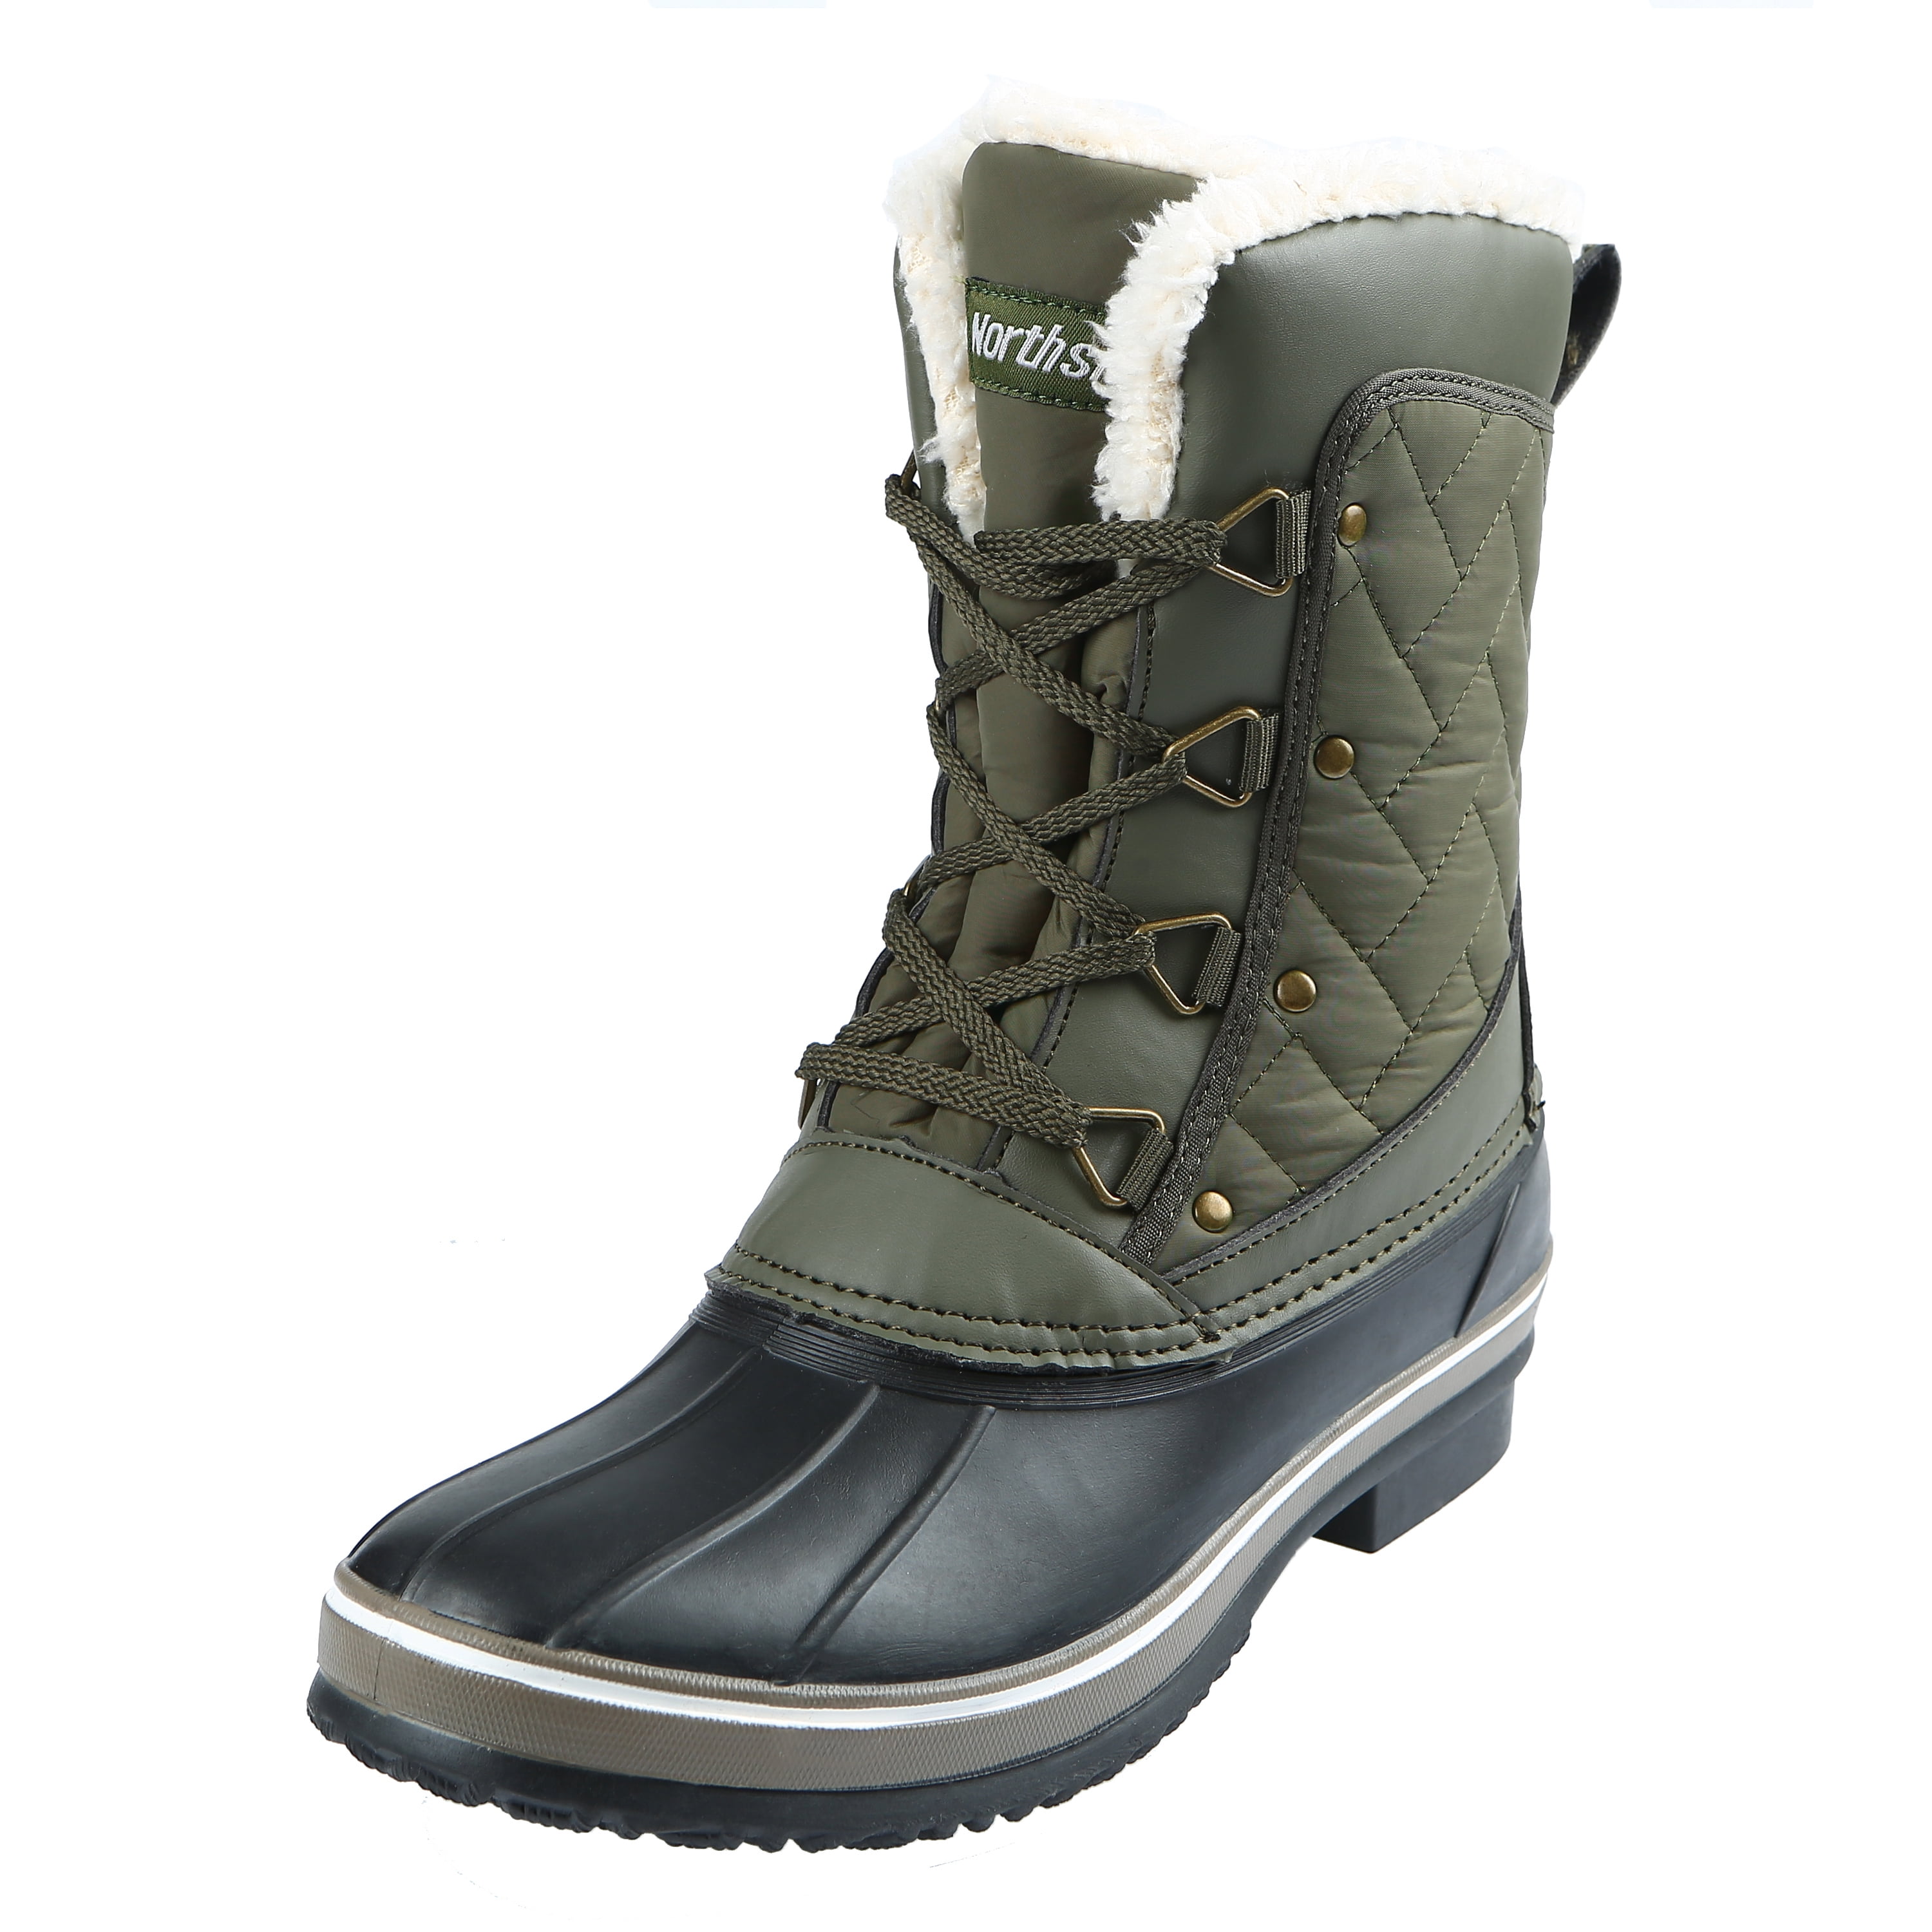 Northside Women's Modesto Waterproof Insulated Quilted Mid Winter Snow ...